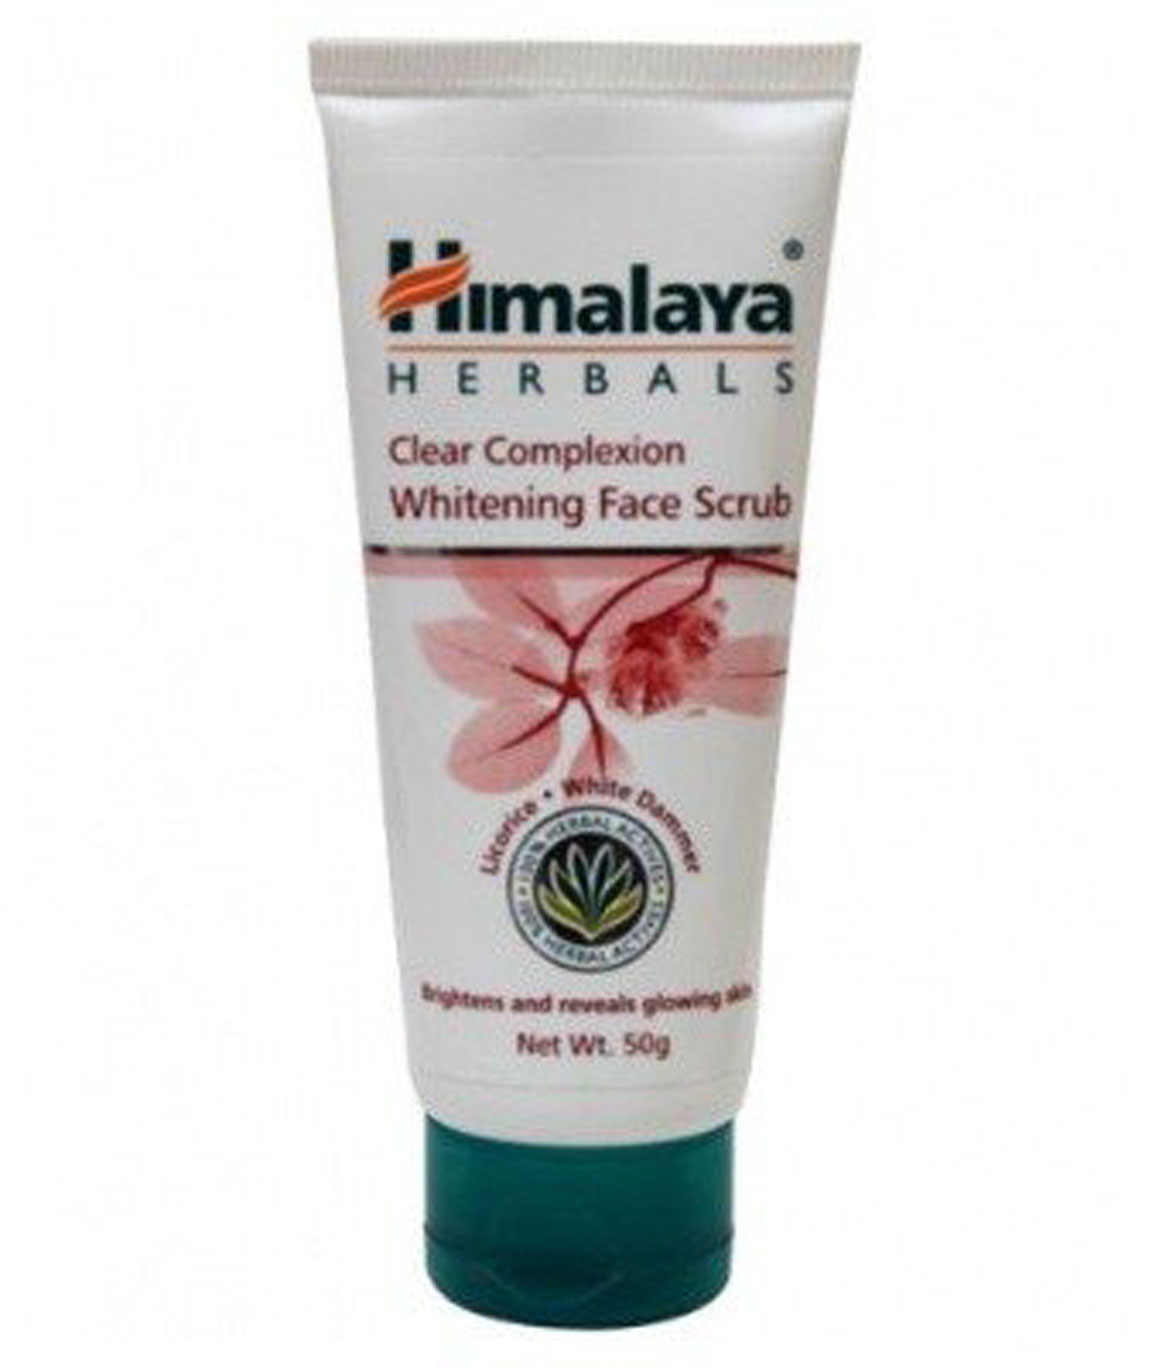 Himalaya Herbals Clear Complexion Whitening Face Scrub (50gm) (Pack of 2)